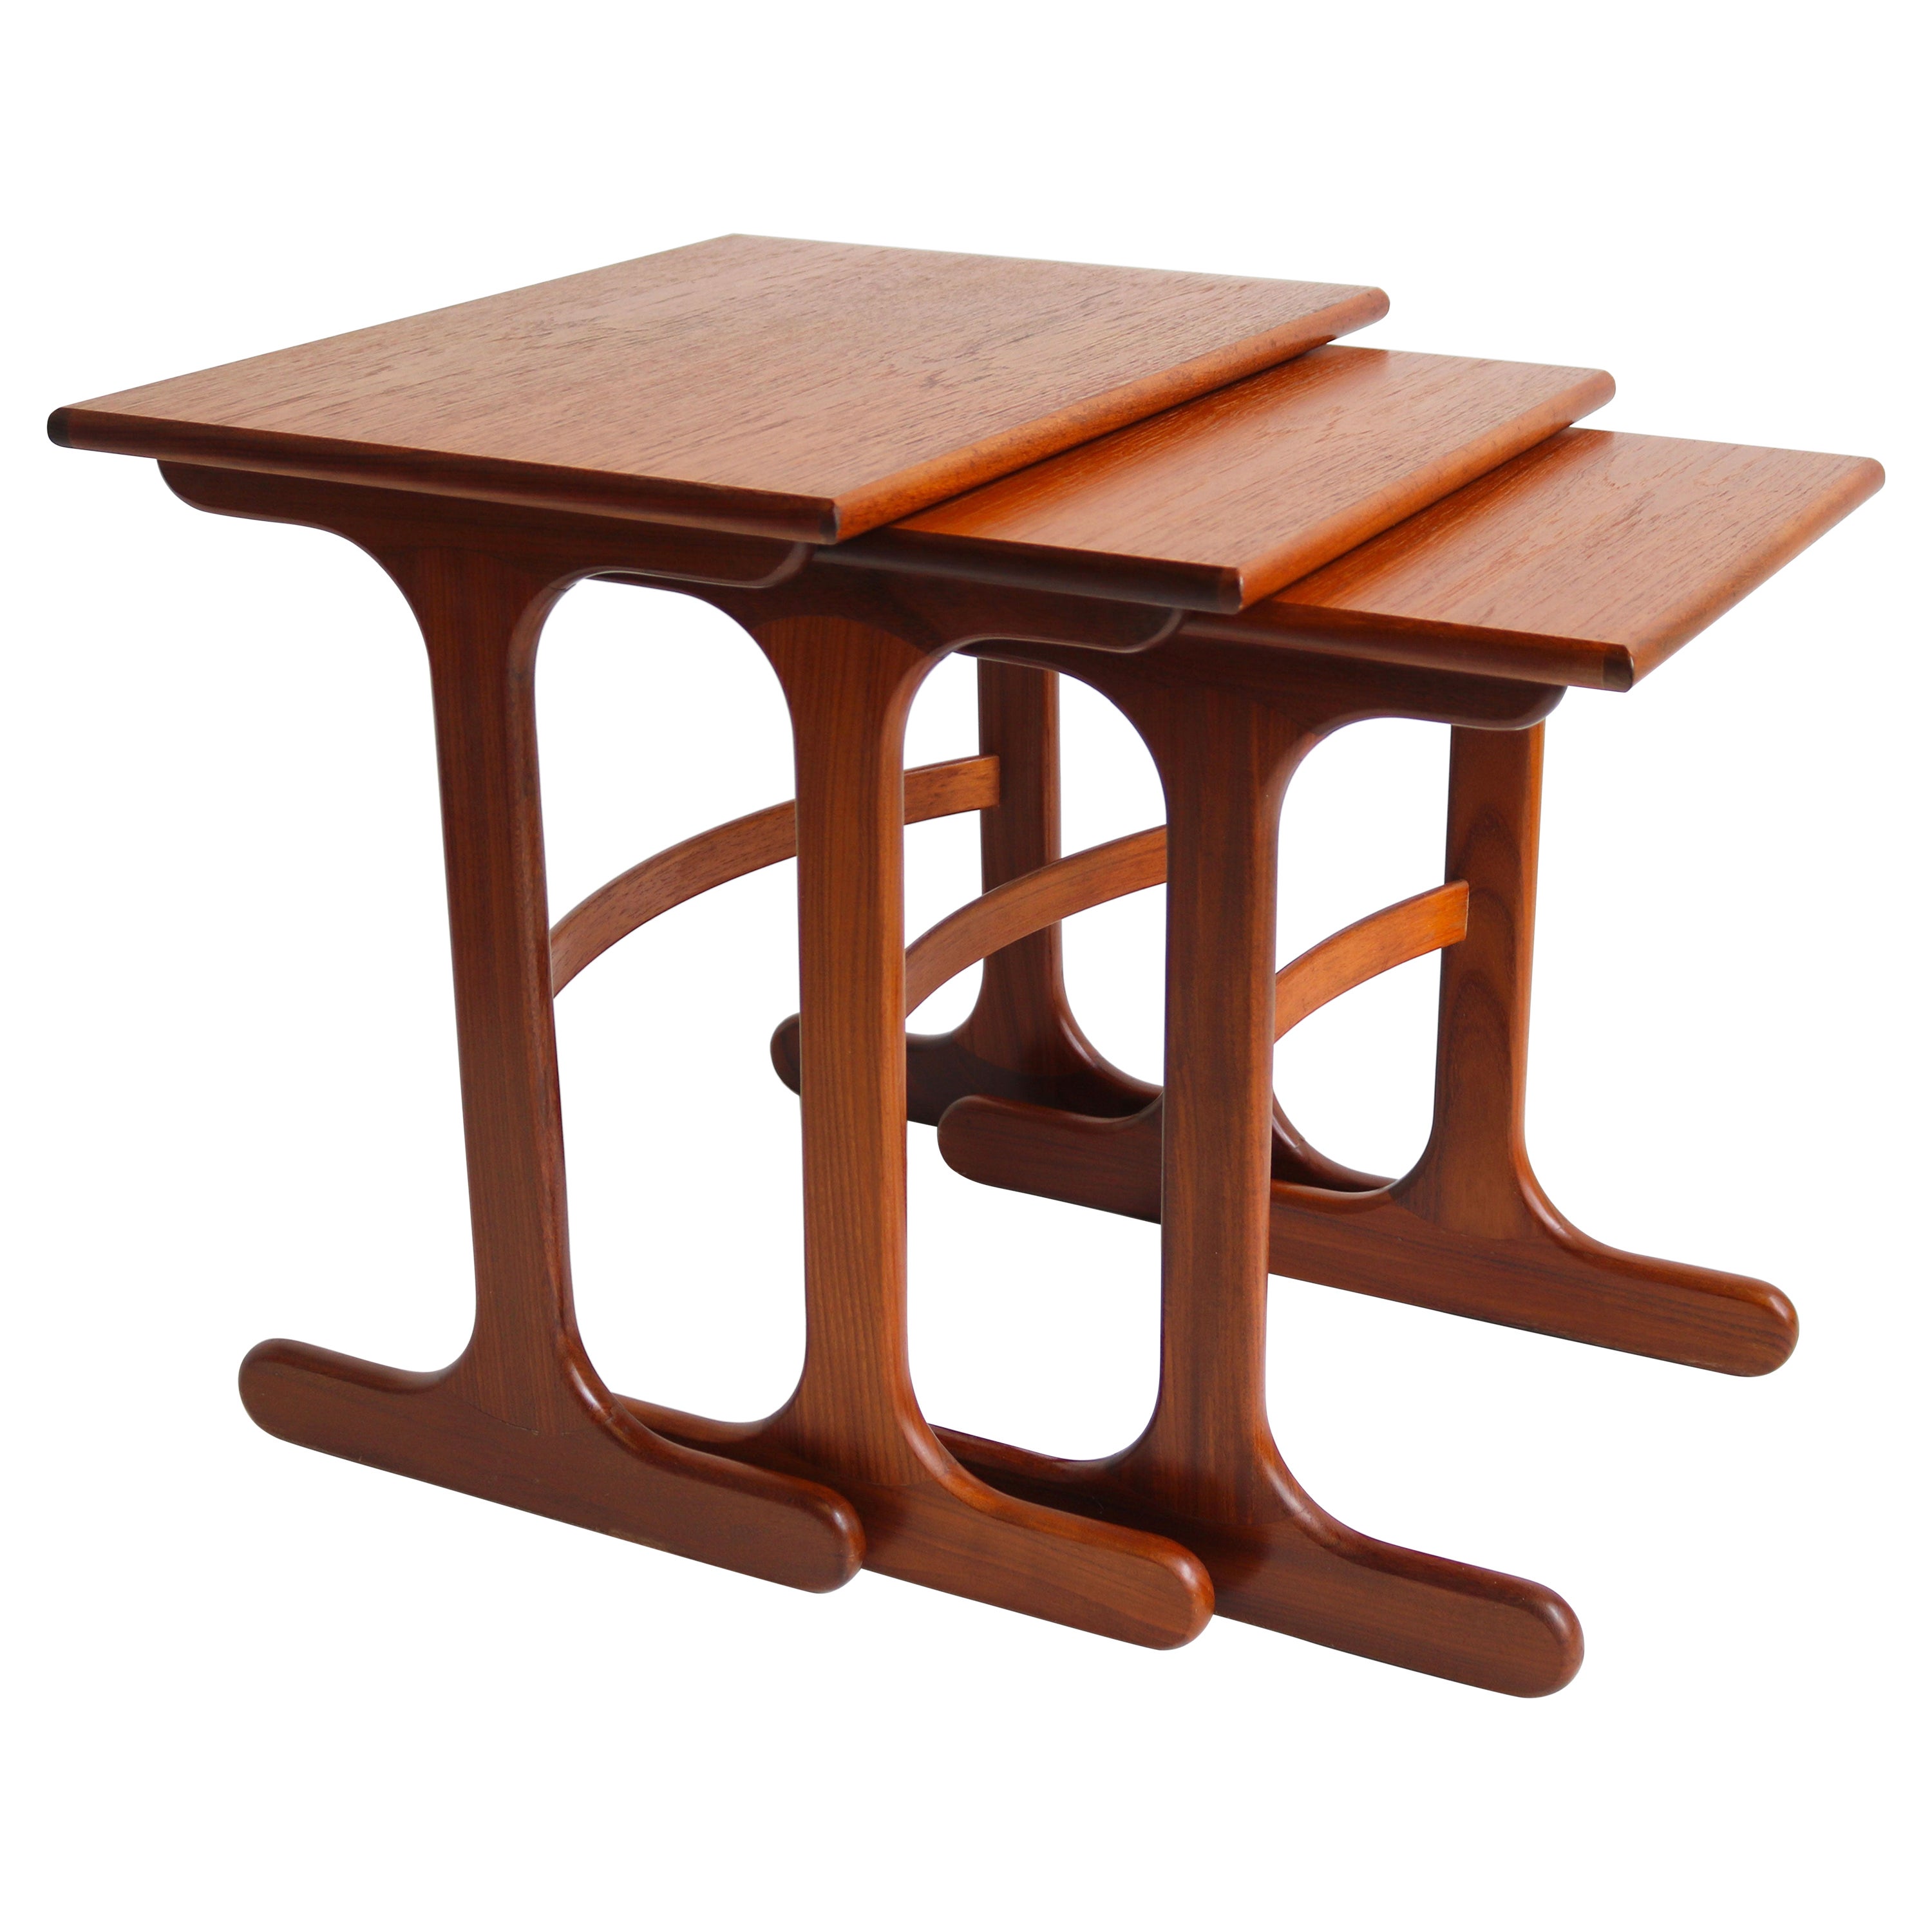 Mid-Century Modern Design Nesting Tables by G-Plan 1960 Teak Stacking Tables